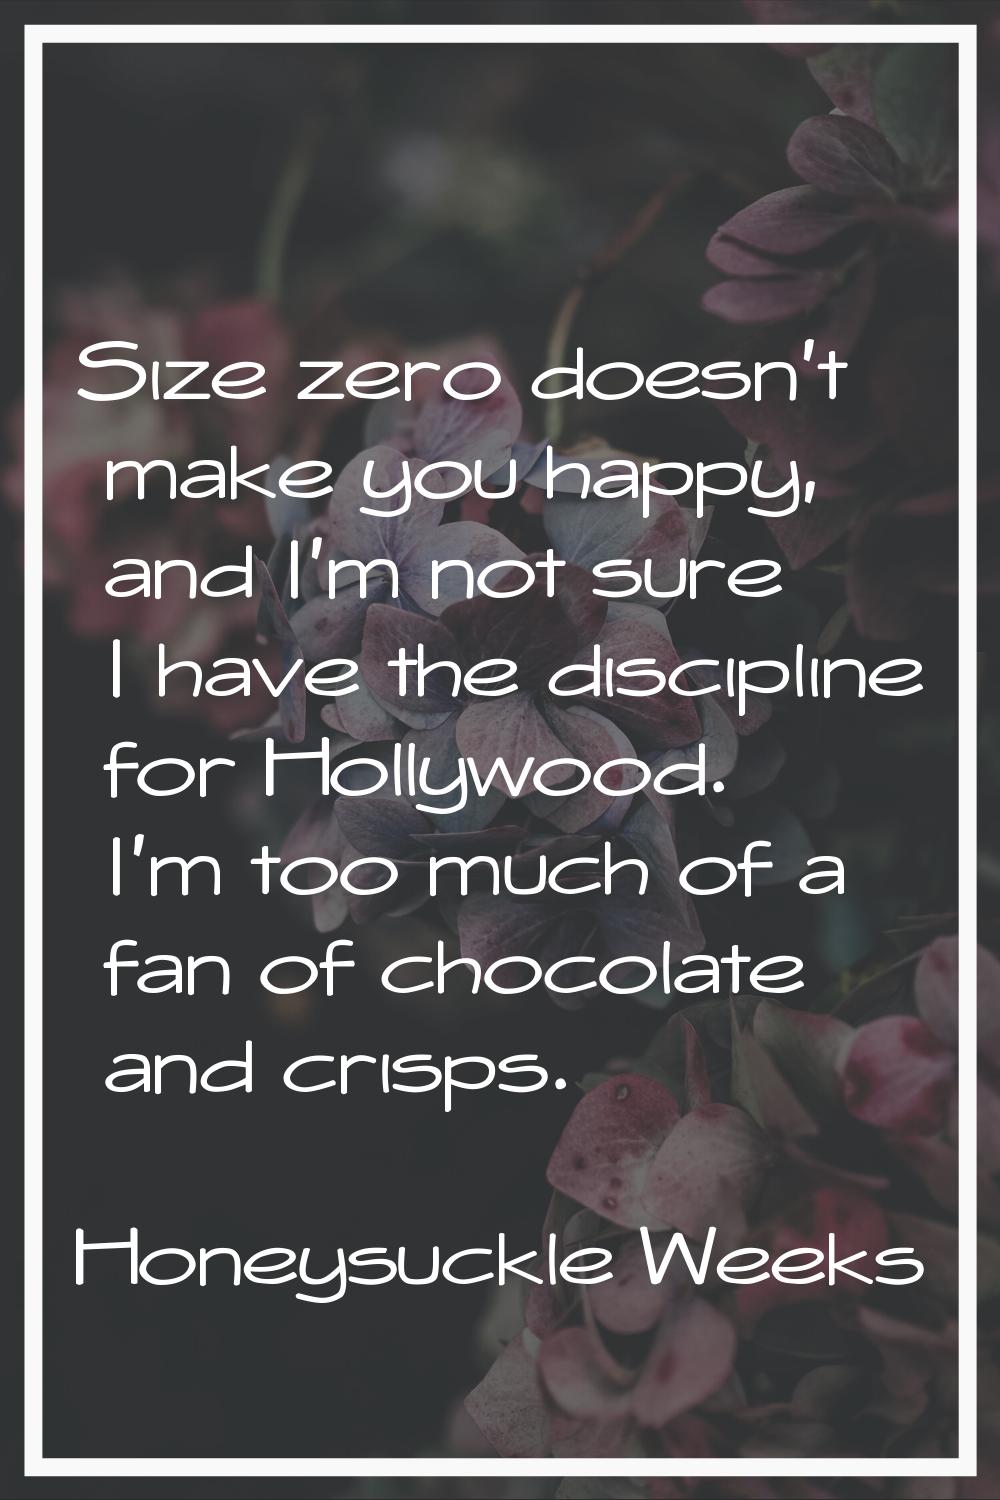 Size zero doesn't make you happy, and I'm not sure I have the discipline for Hollywood. I'm too muc